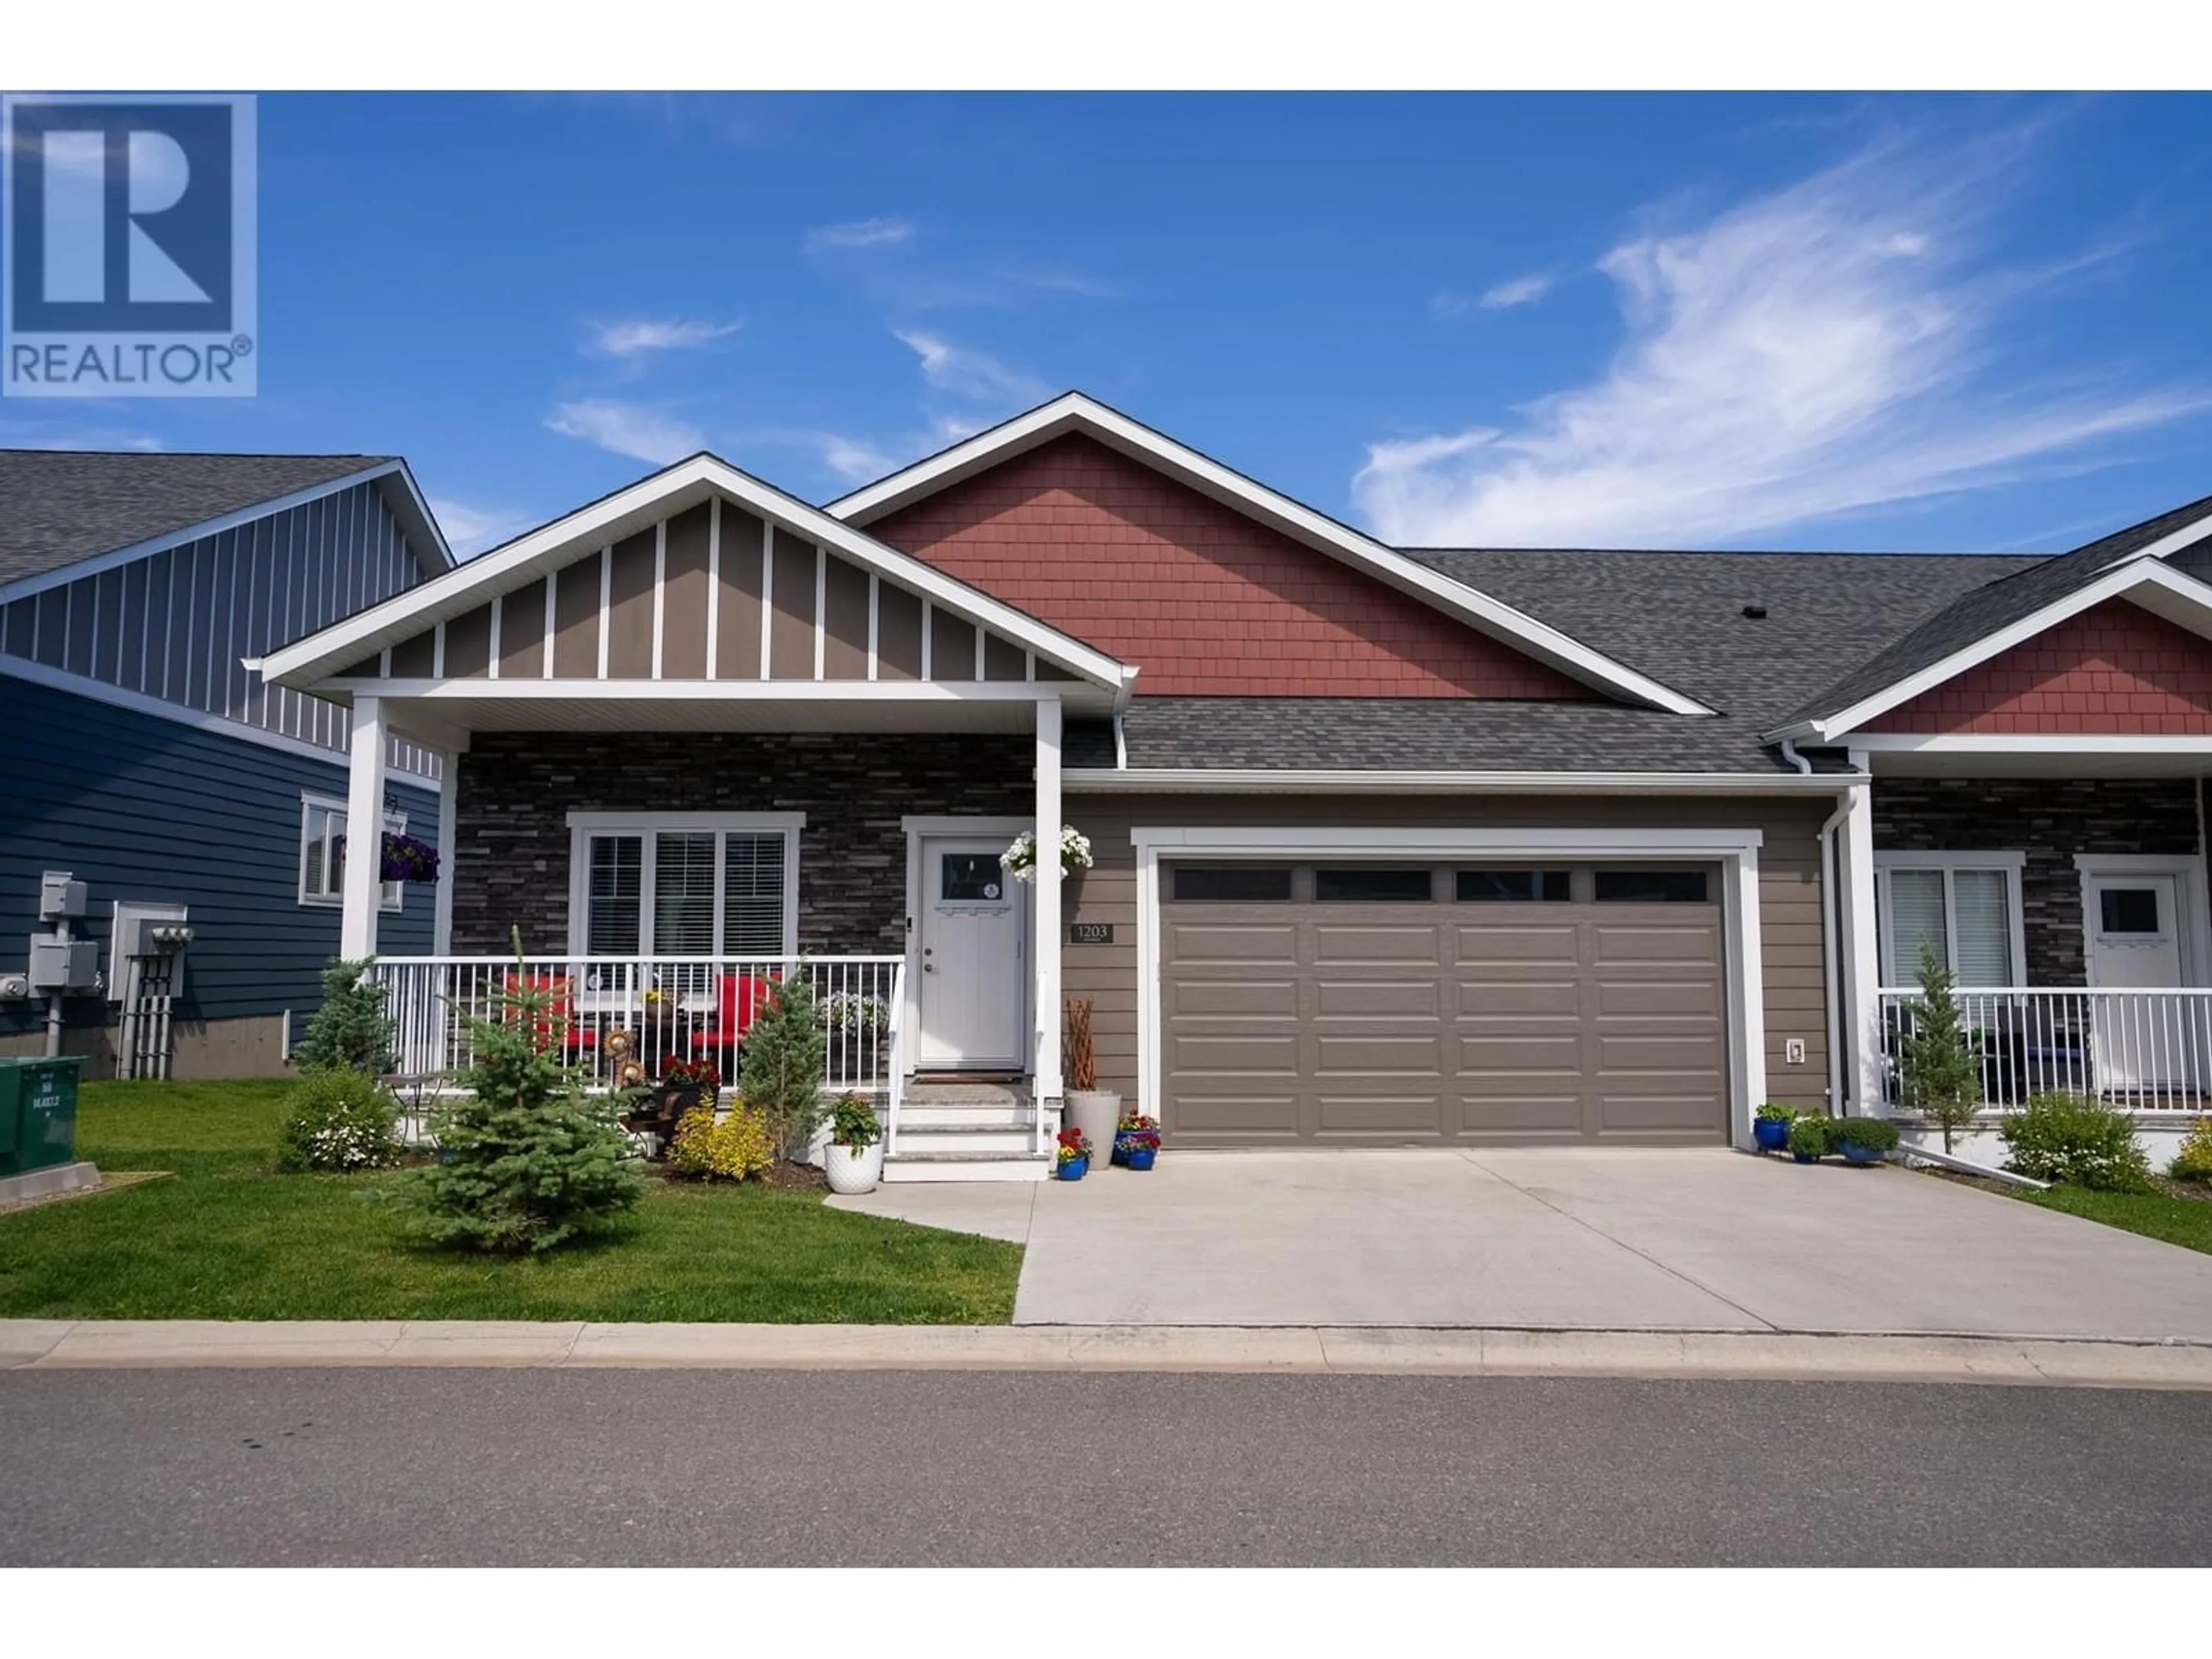 Home with vinyl exterior material for 1203 2425 ROWE STREET, Prince George British Columbia V2N0J3